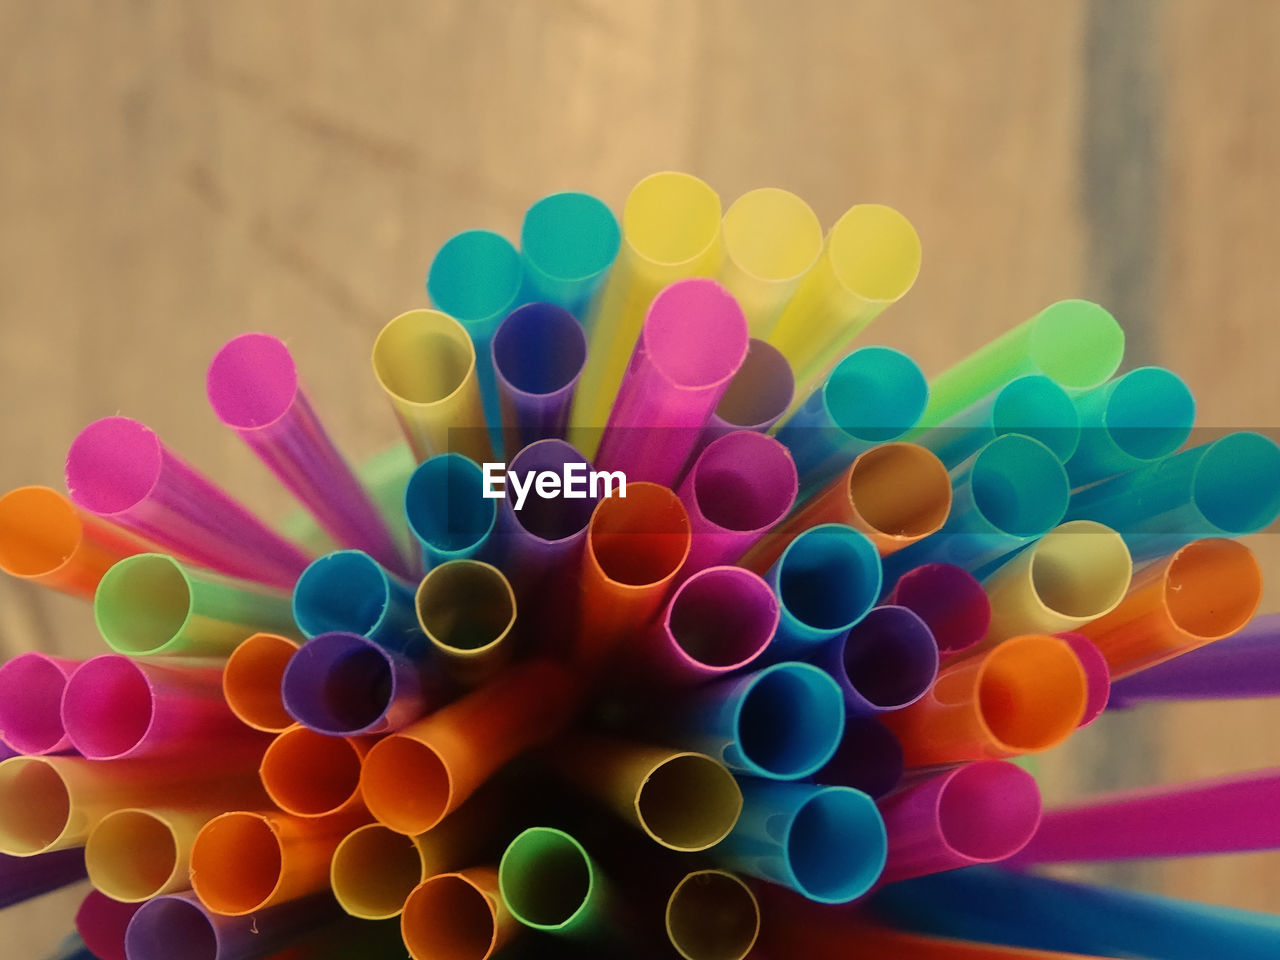 CLOSE-UP VIEW OF MULTI COLORED PENCILS